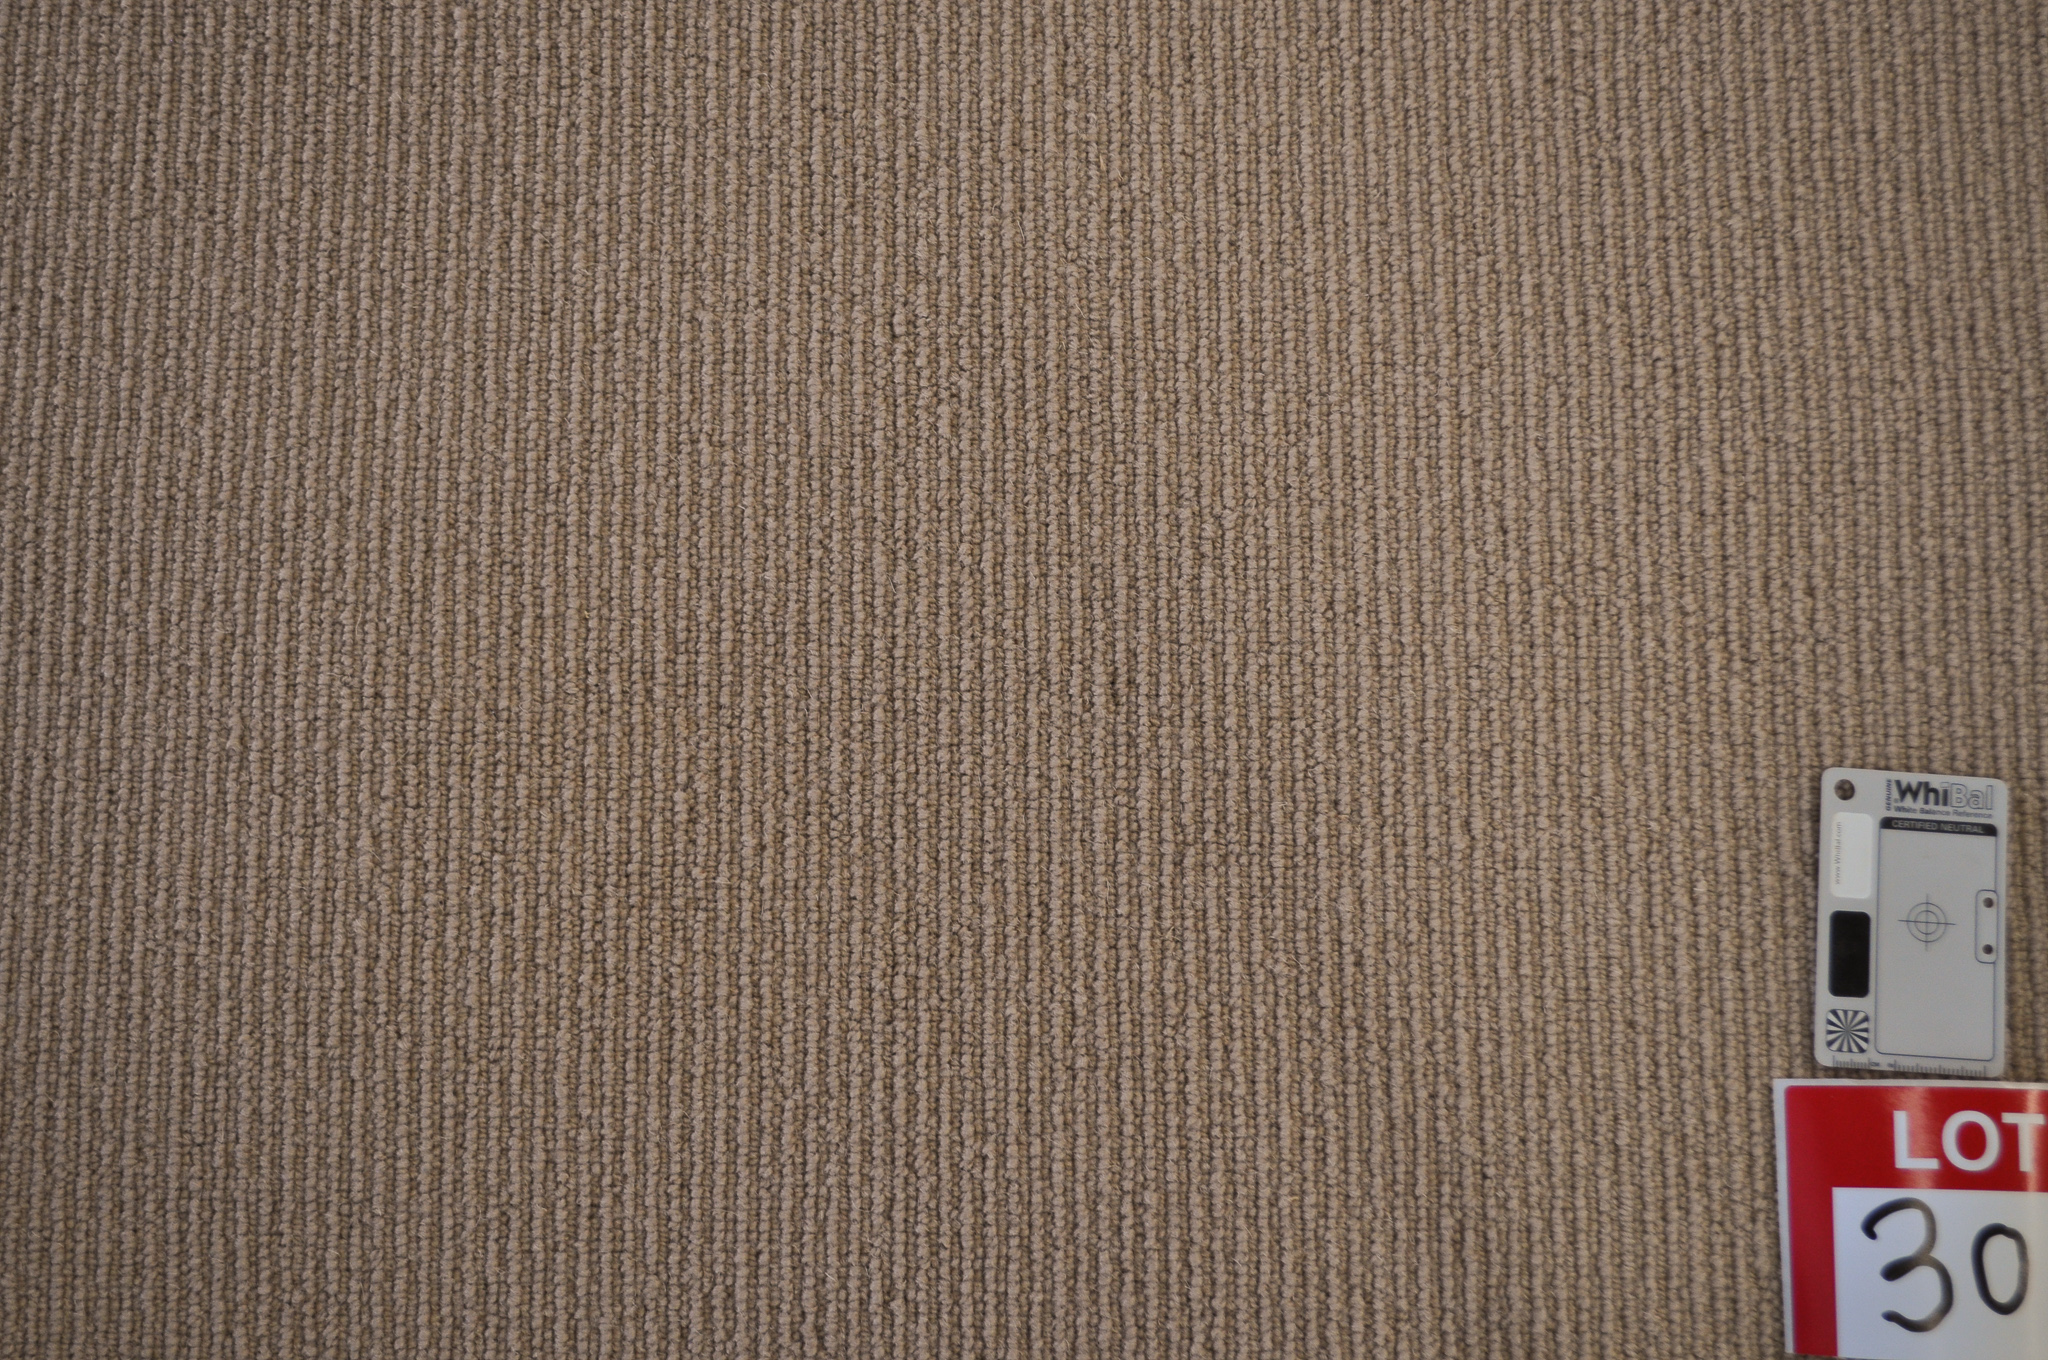 dark beige colored, sisal pile roll of carpet on sale at Concord Floors, it being a remnant roll in Concord Floor's warehouse.